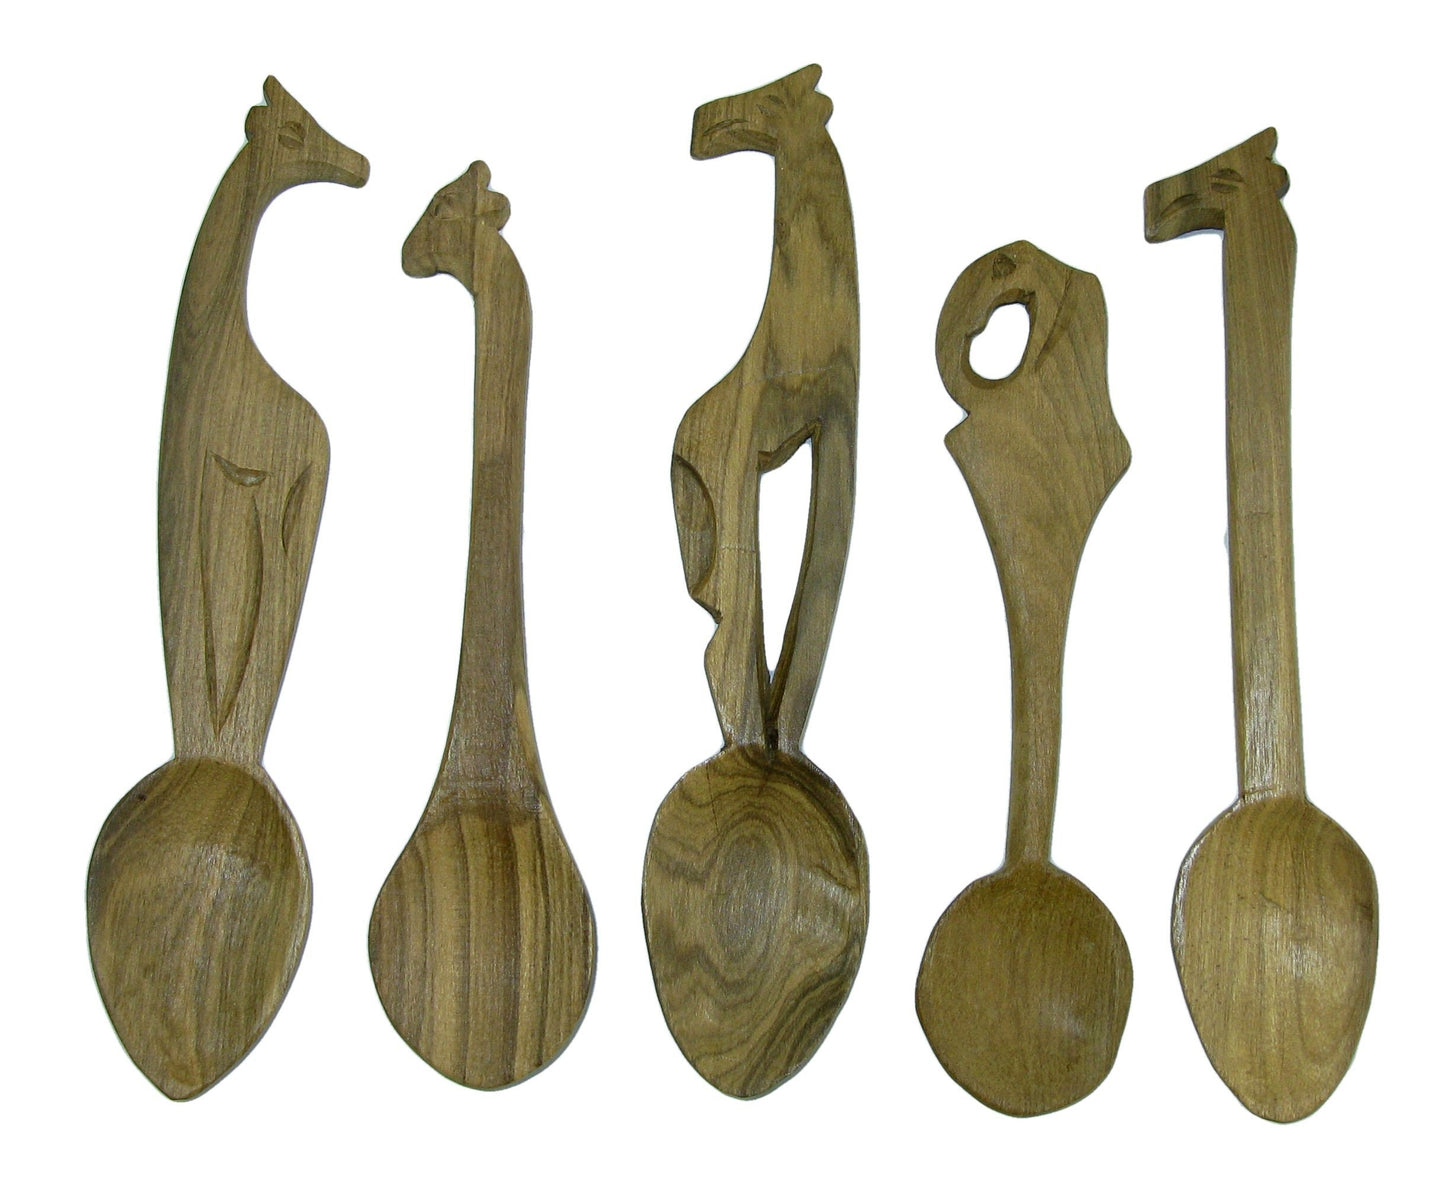 Set of 5 Wildlife theme African Handcrafted wooden Teaspoons 6 inch / 15 cm Spoons Elephant Giraffe Lion etc